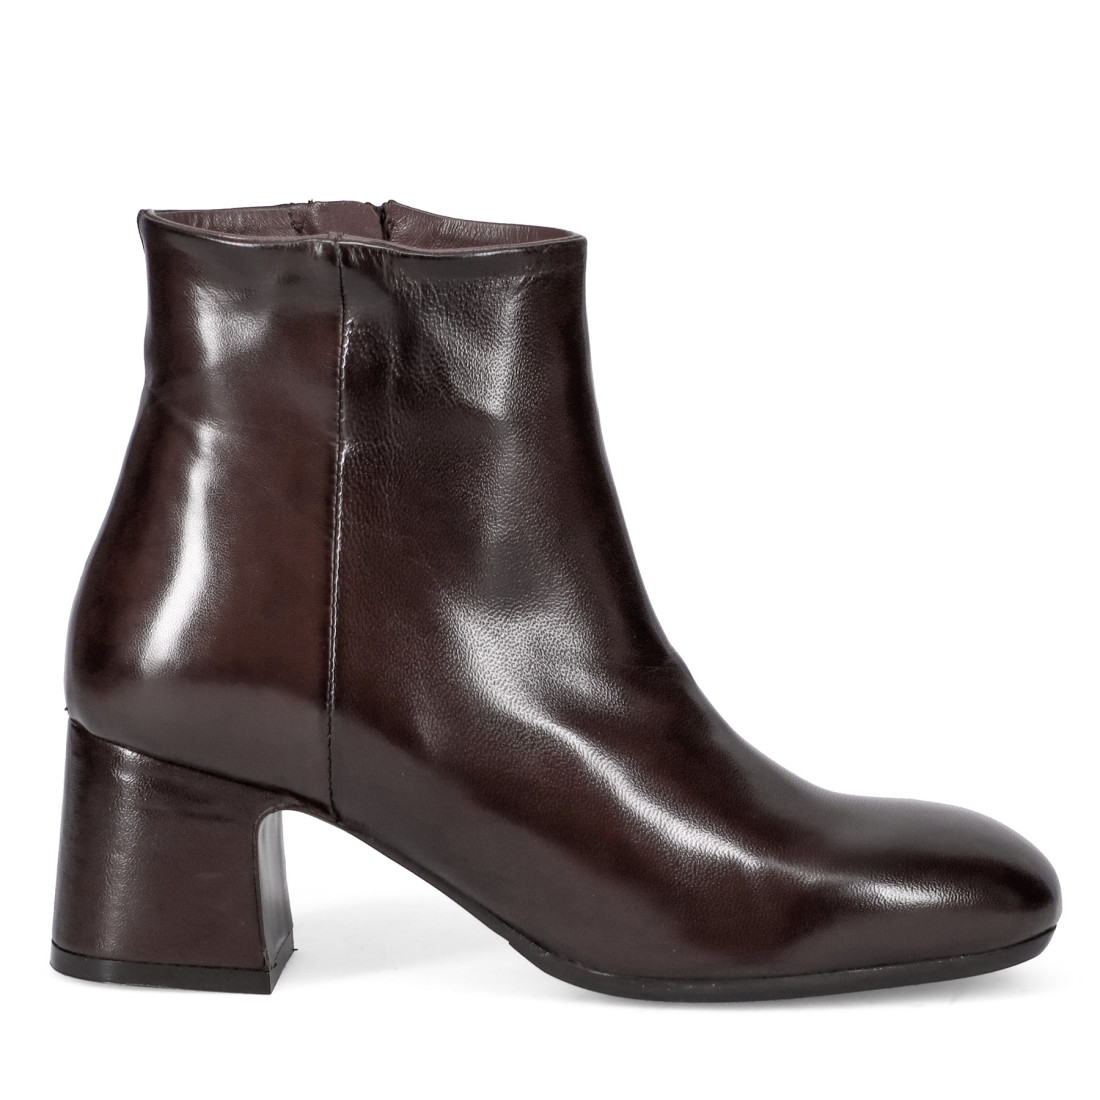 Calpierre ankle boot in brown nappa with medium heel